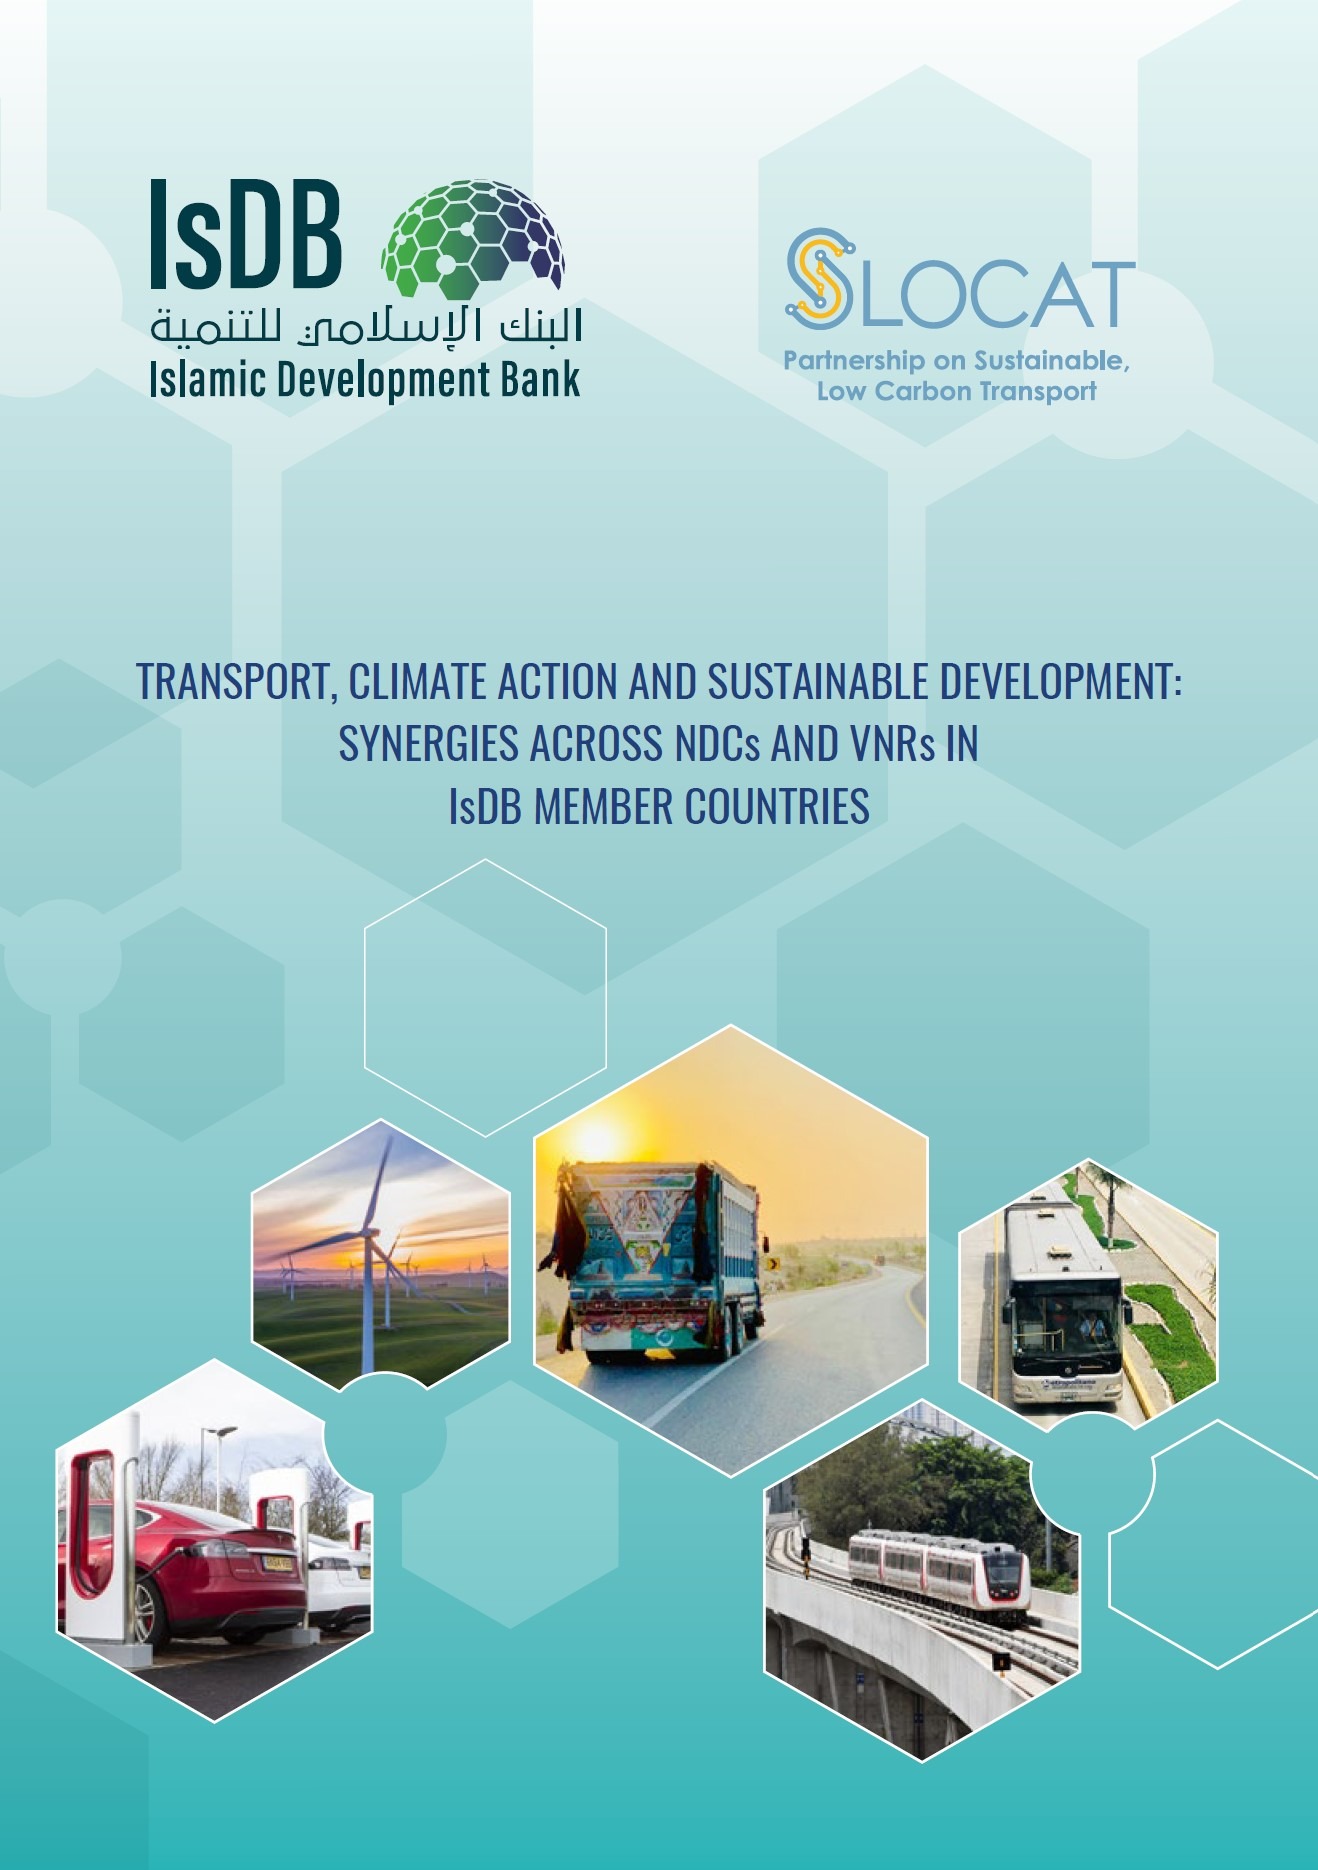 Transport, Climate Action and Sustainable Development: Synergies Across NDCs and VNRs in IsDB Member Countries